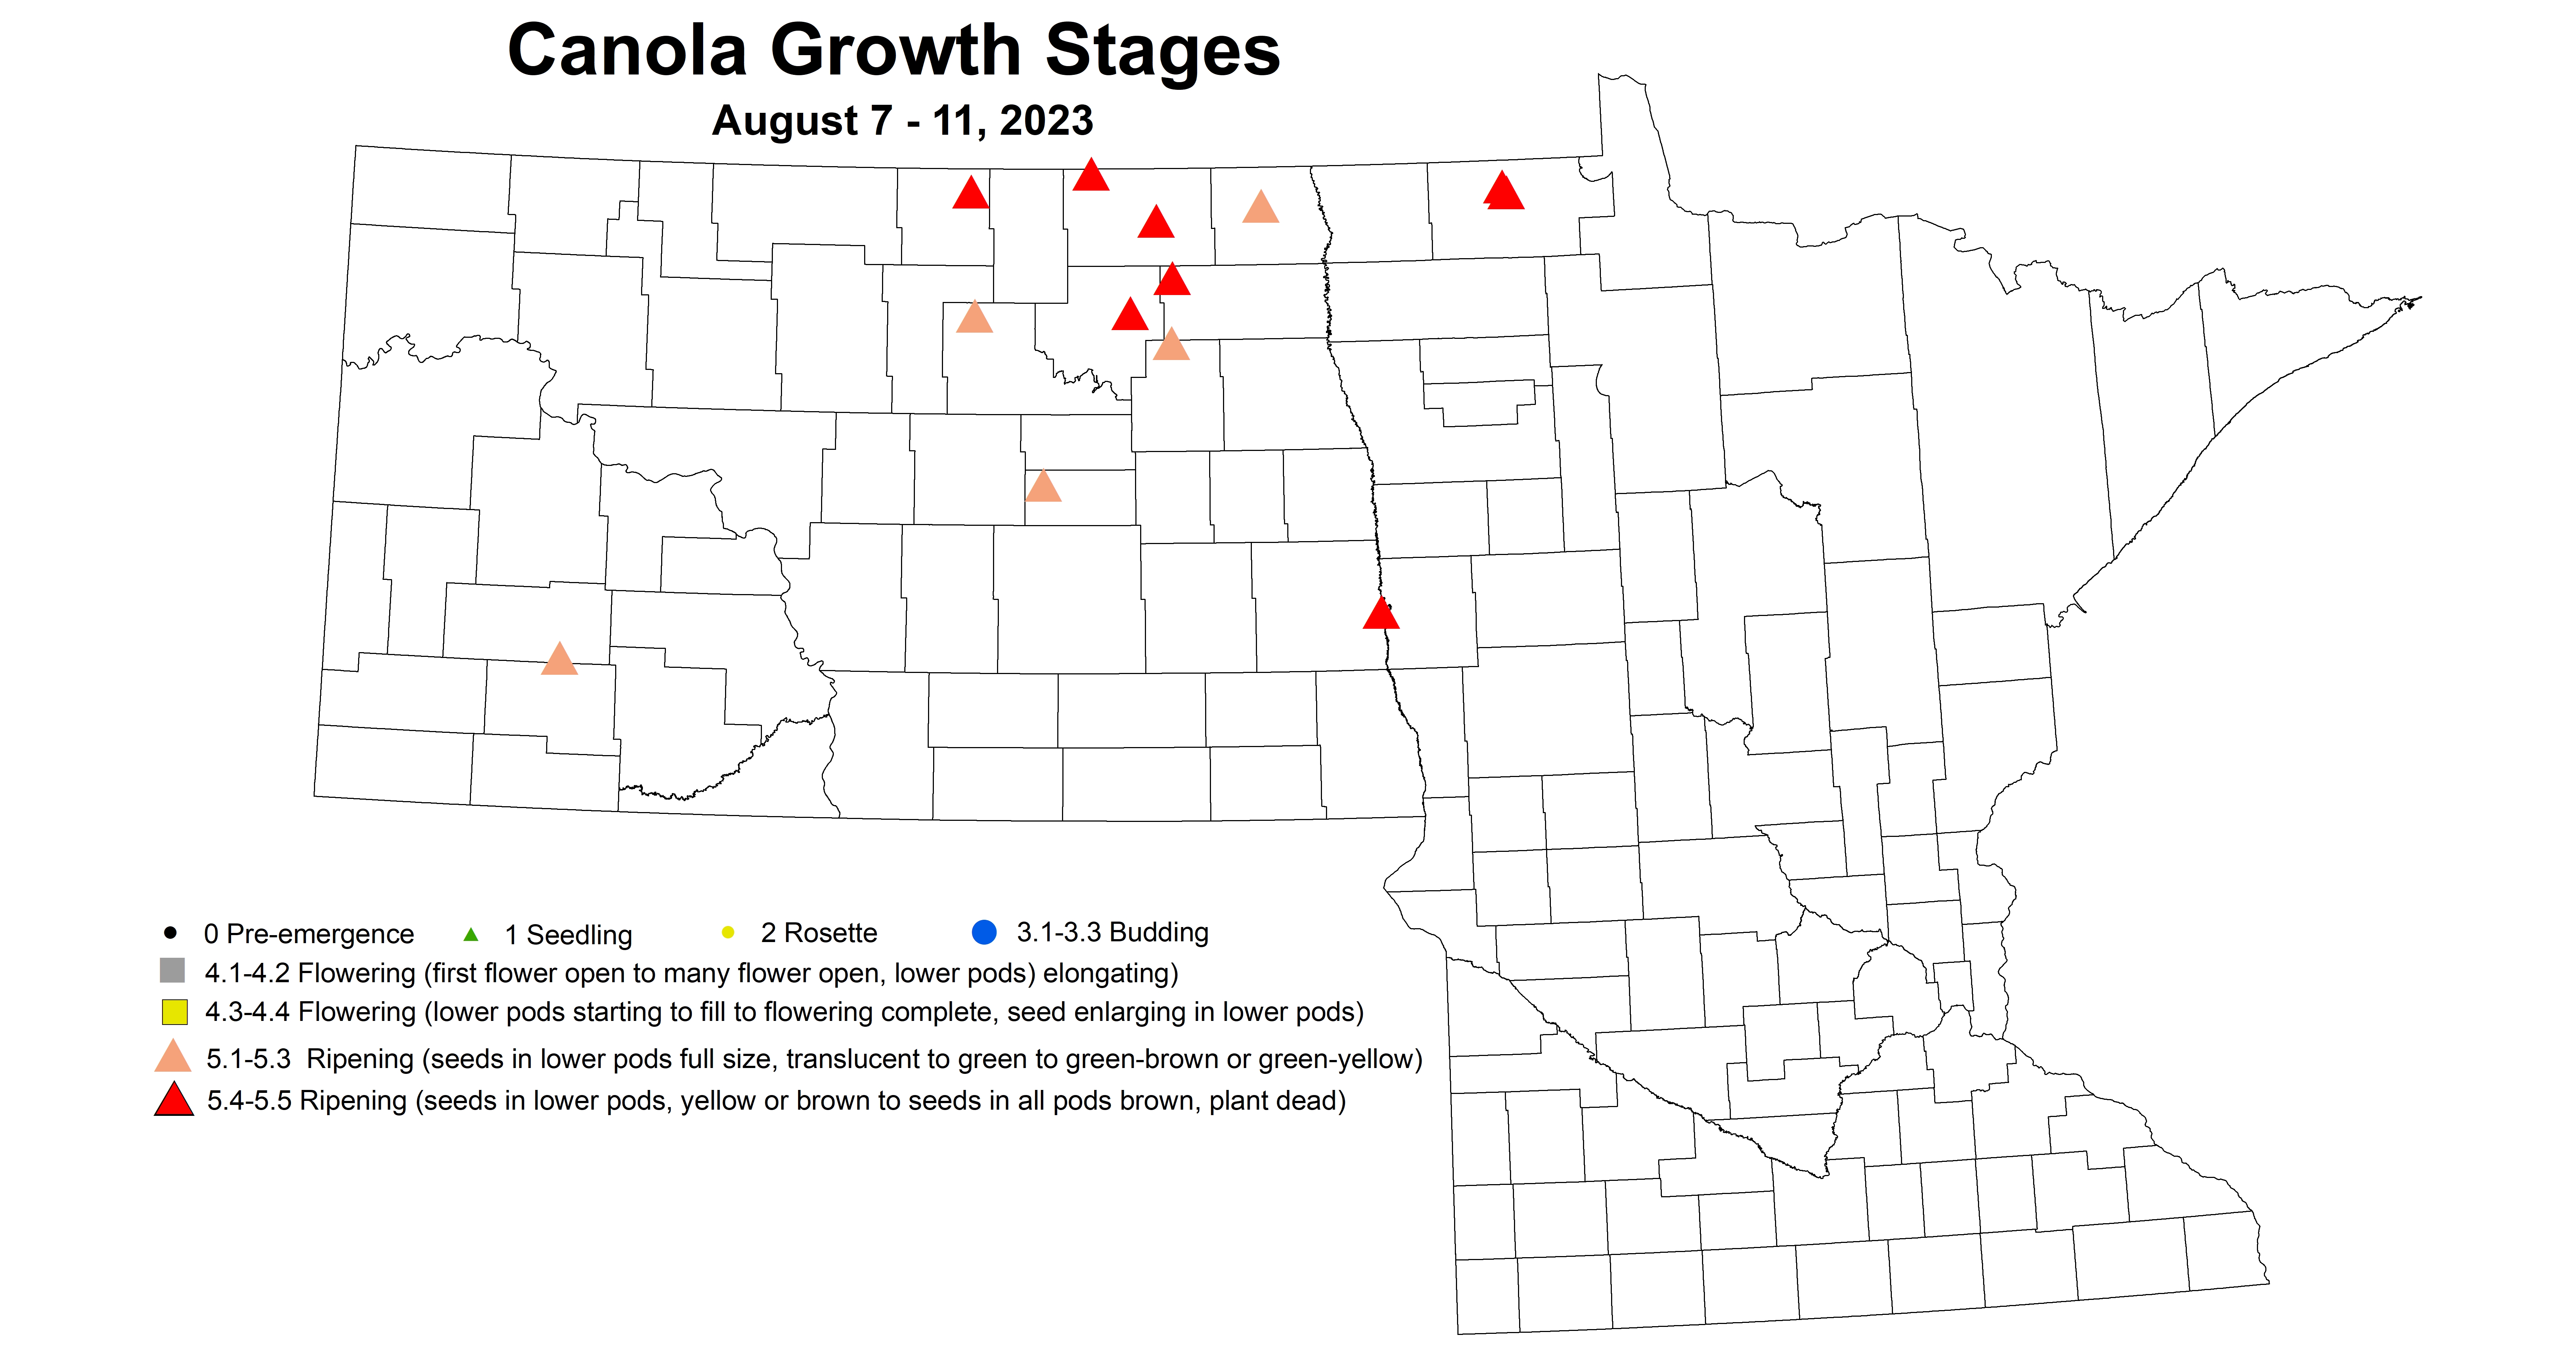 canola growth stages 8.7-8.11 2023